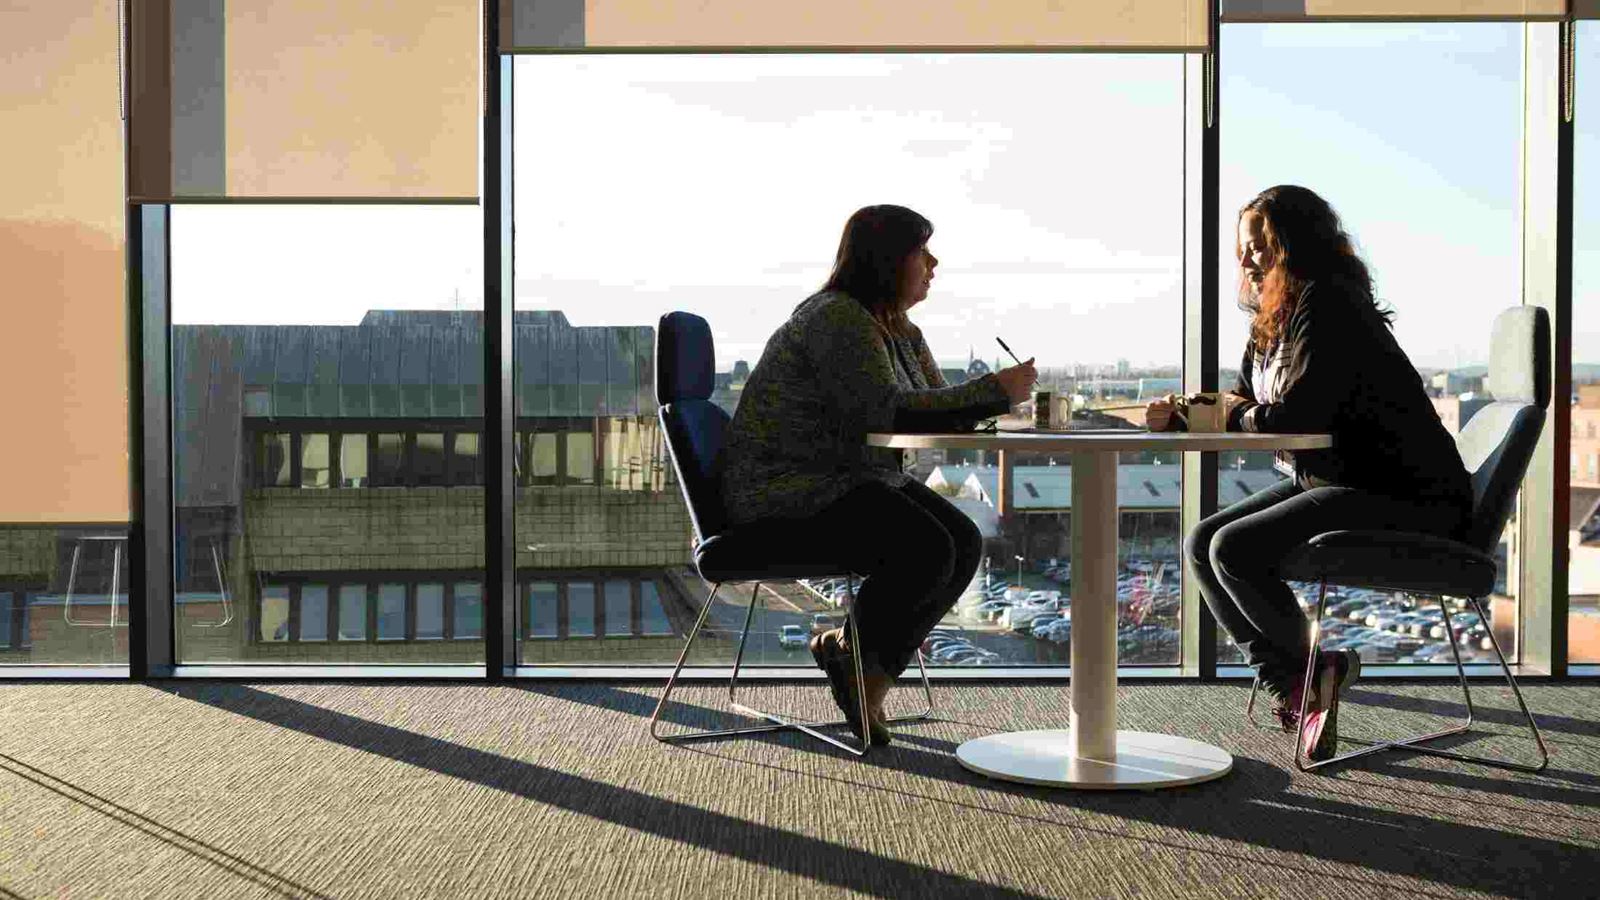 Two AXA employees sat at a table having a one-to-one meeting